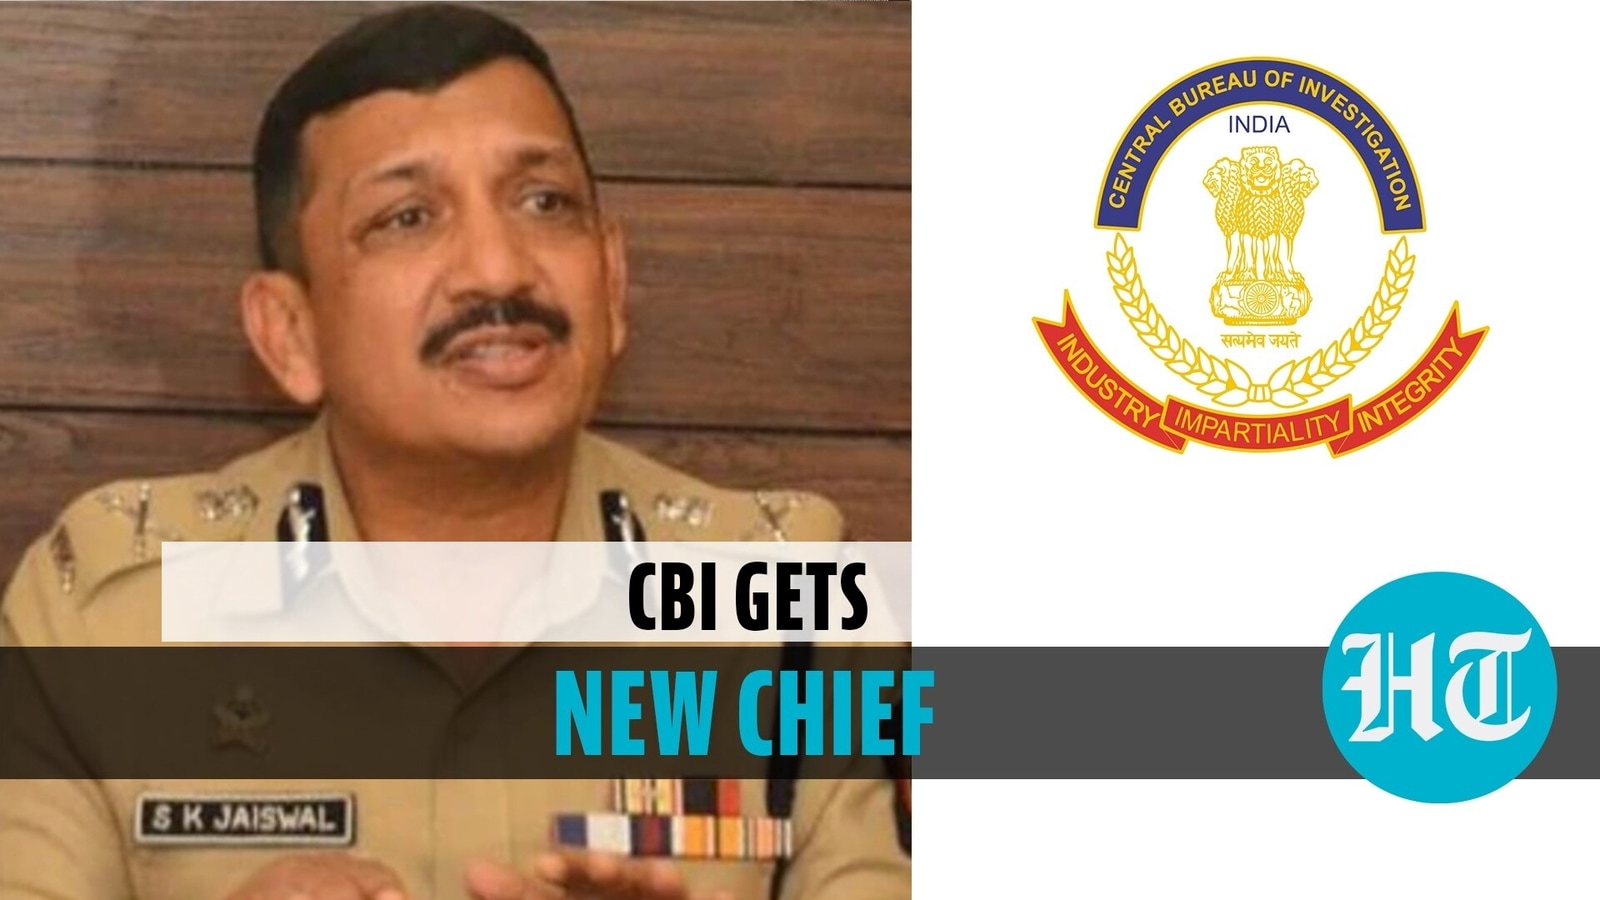 From SPG protecting PM, to spy agency R&AW: New CBI chief SK Jaiswal's ...